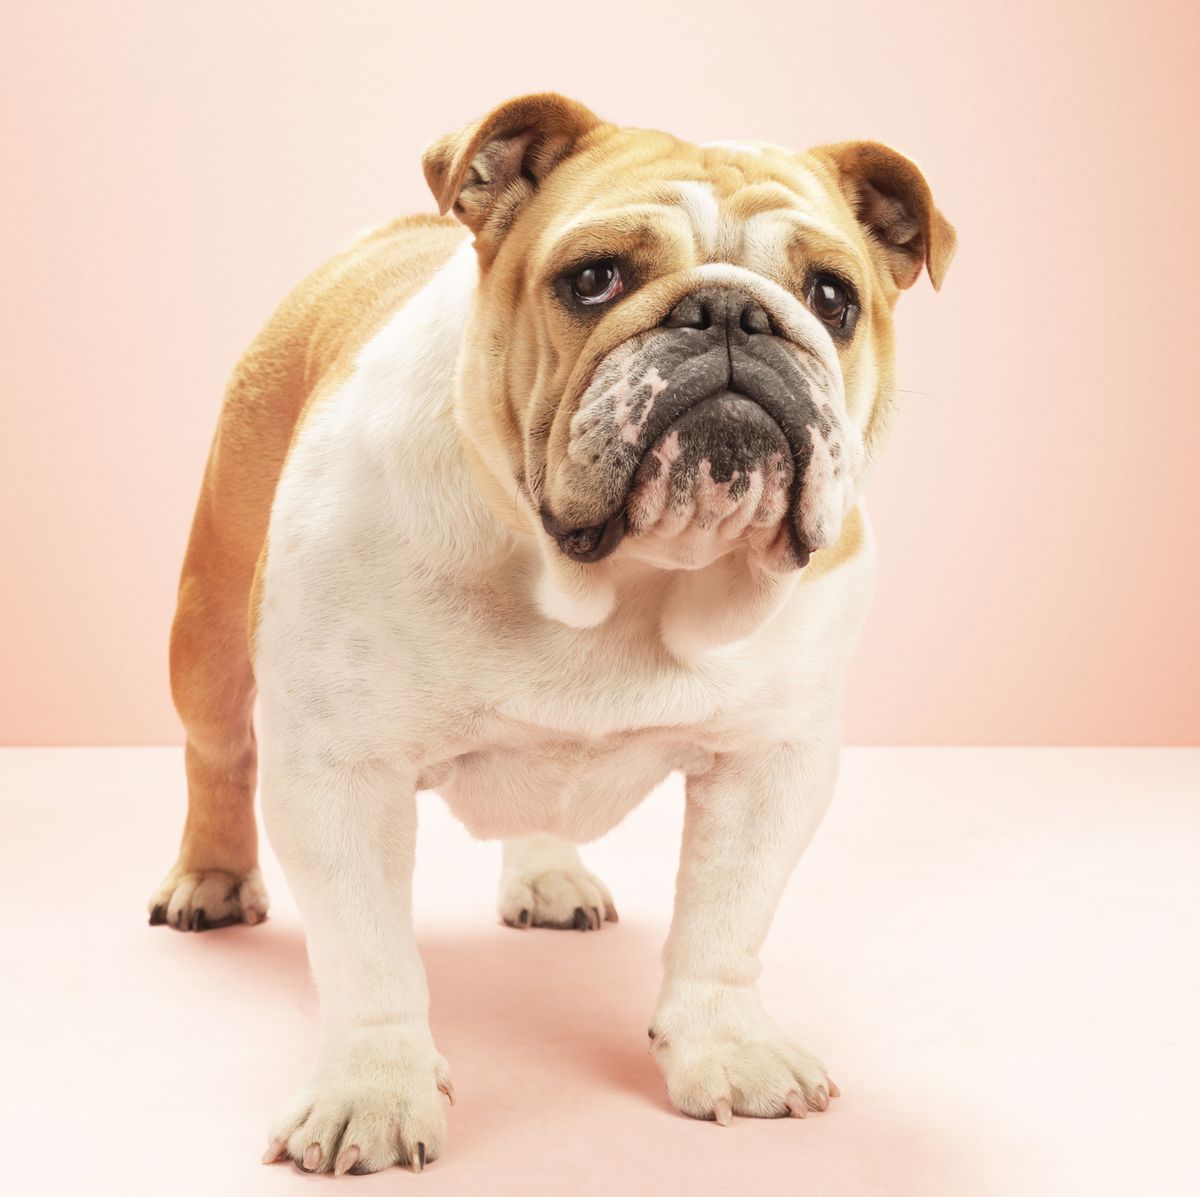 13 Popular Types of Bulldogs: English, American, Victorian and More